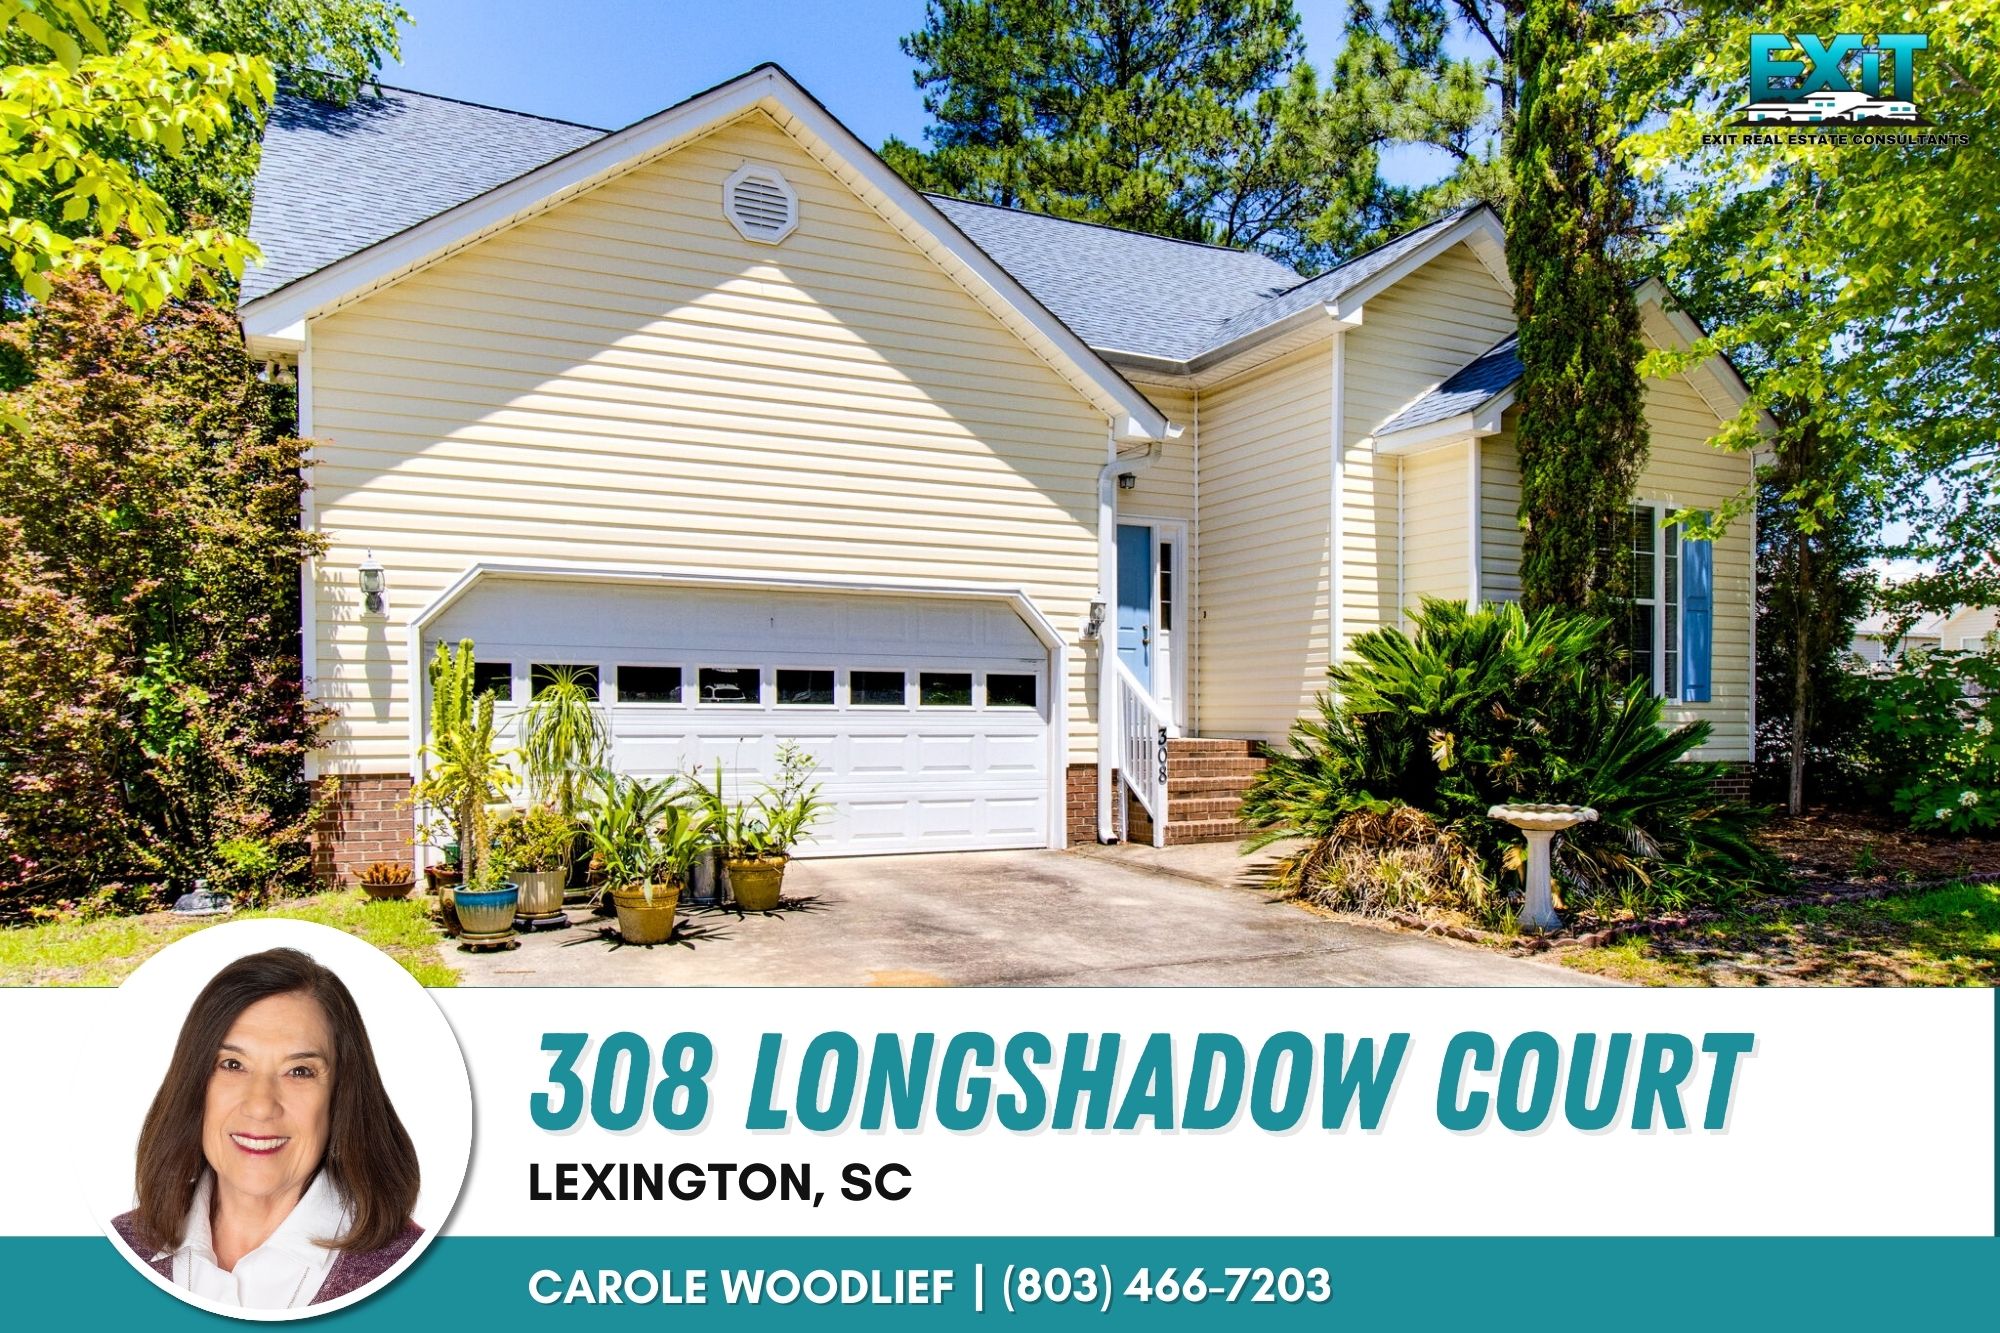 Just listed in Shadowbrooke - Lexington